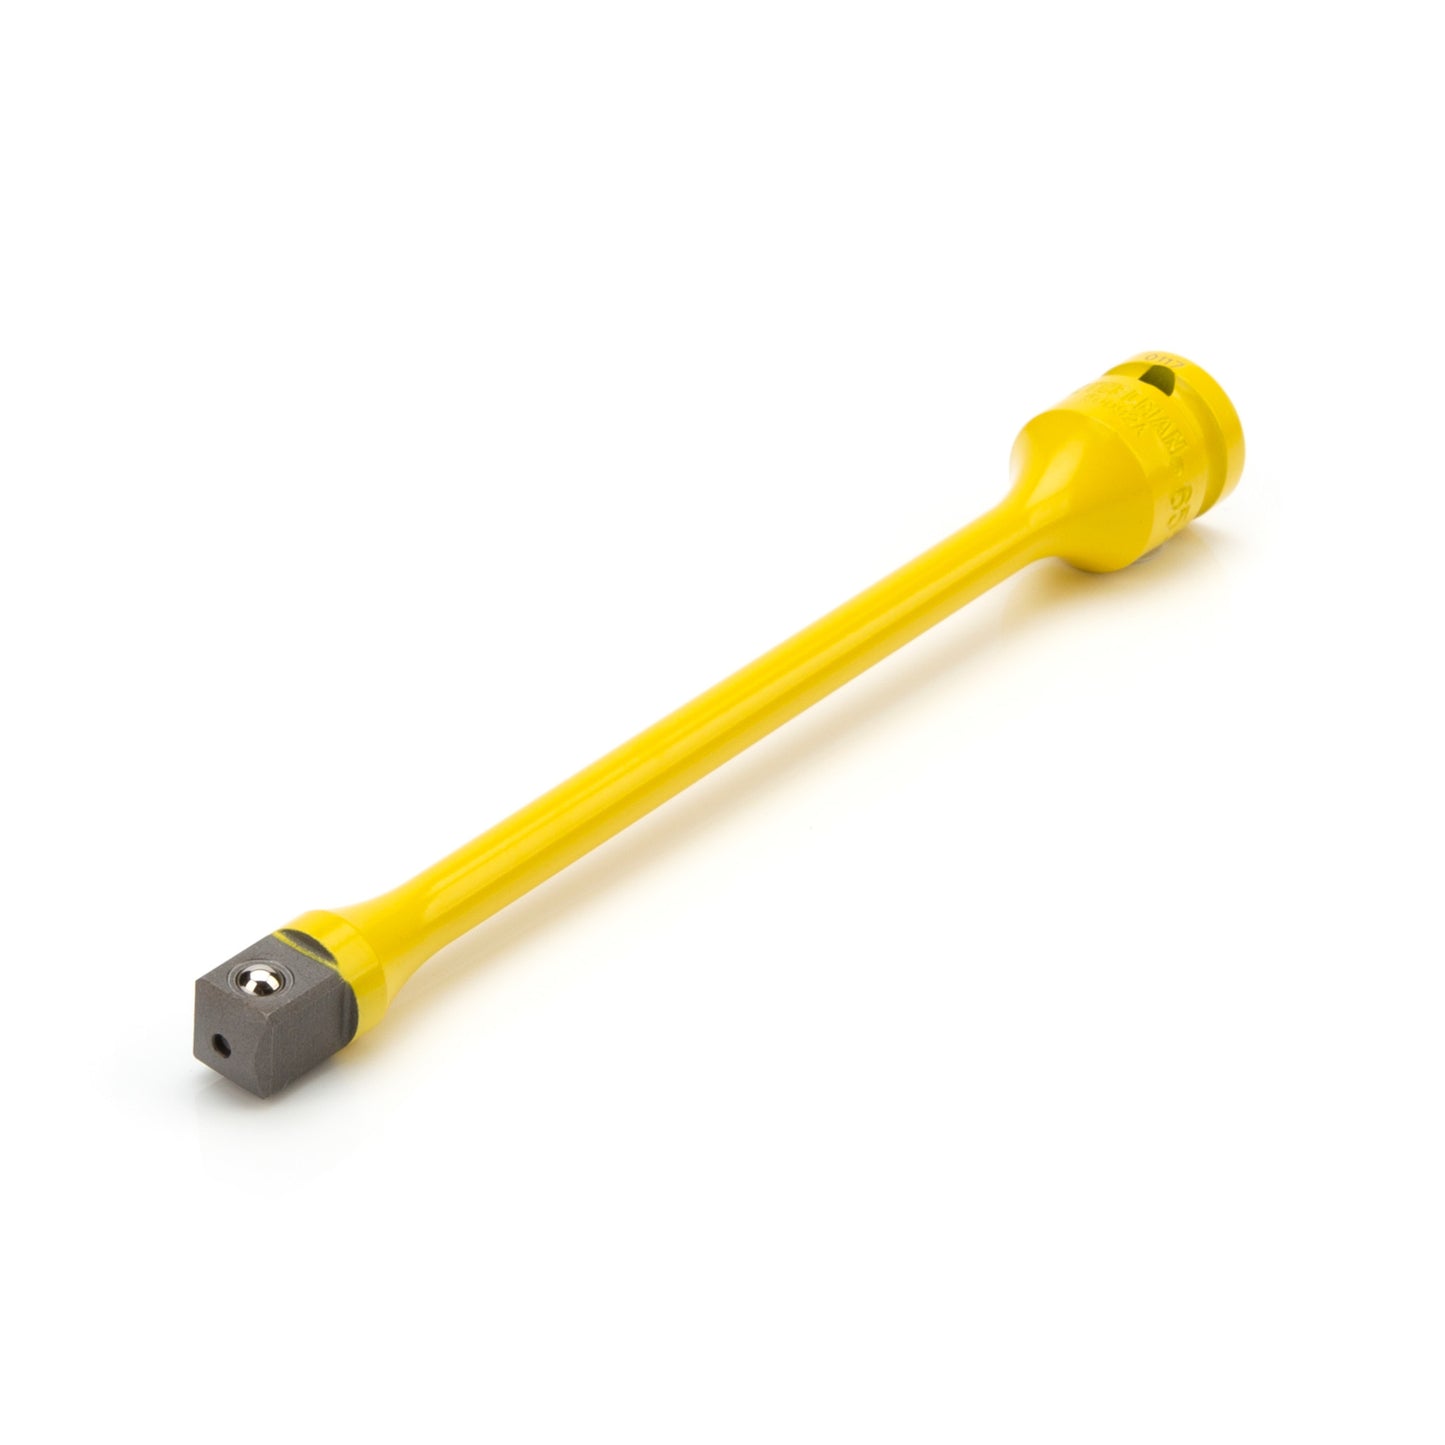 The STEELMAN 1/2-Inch Drive Yellow Torque Extension prevents damage caused by over-tightening lug nuts. This 8-inch extension bar is machined to a maximum torque of 65 ft-lb. Additional force causes it to flex and absorb the extra impact.